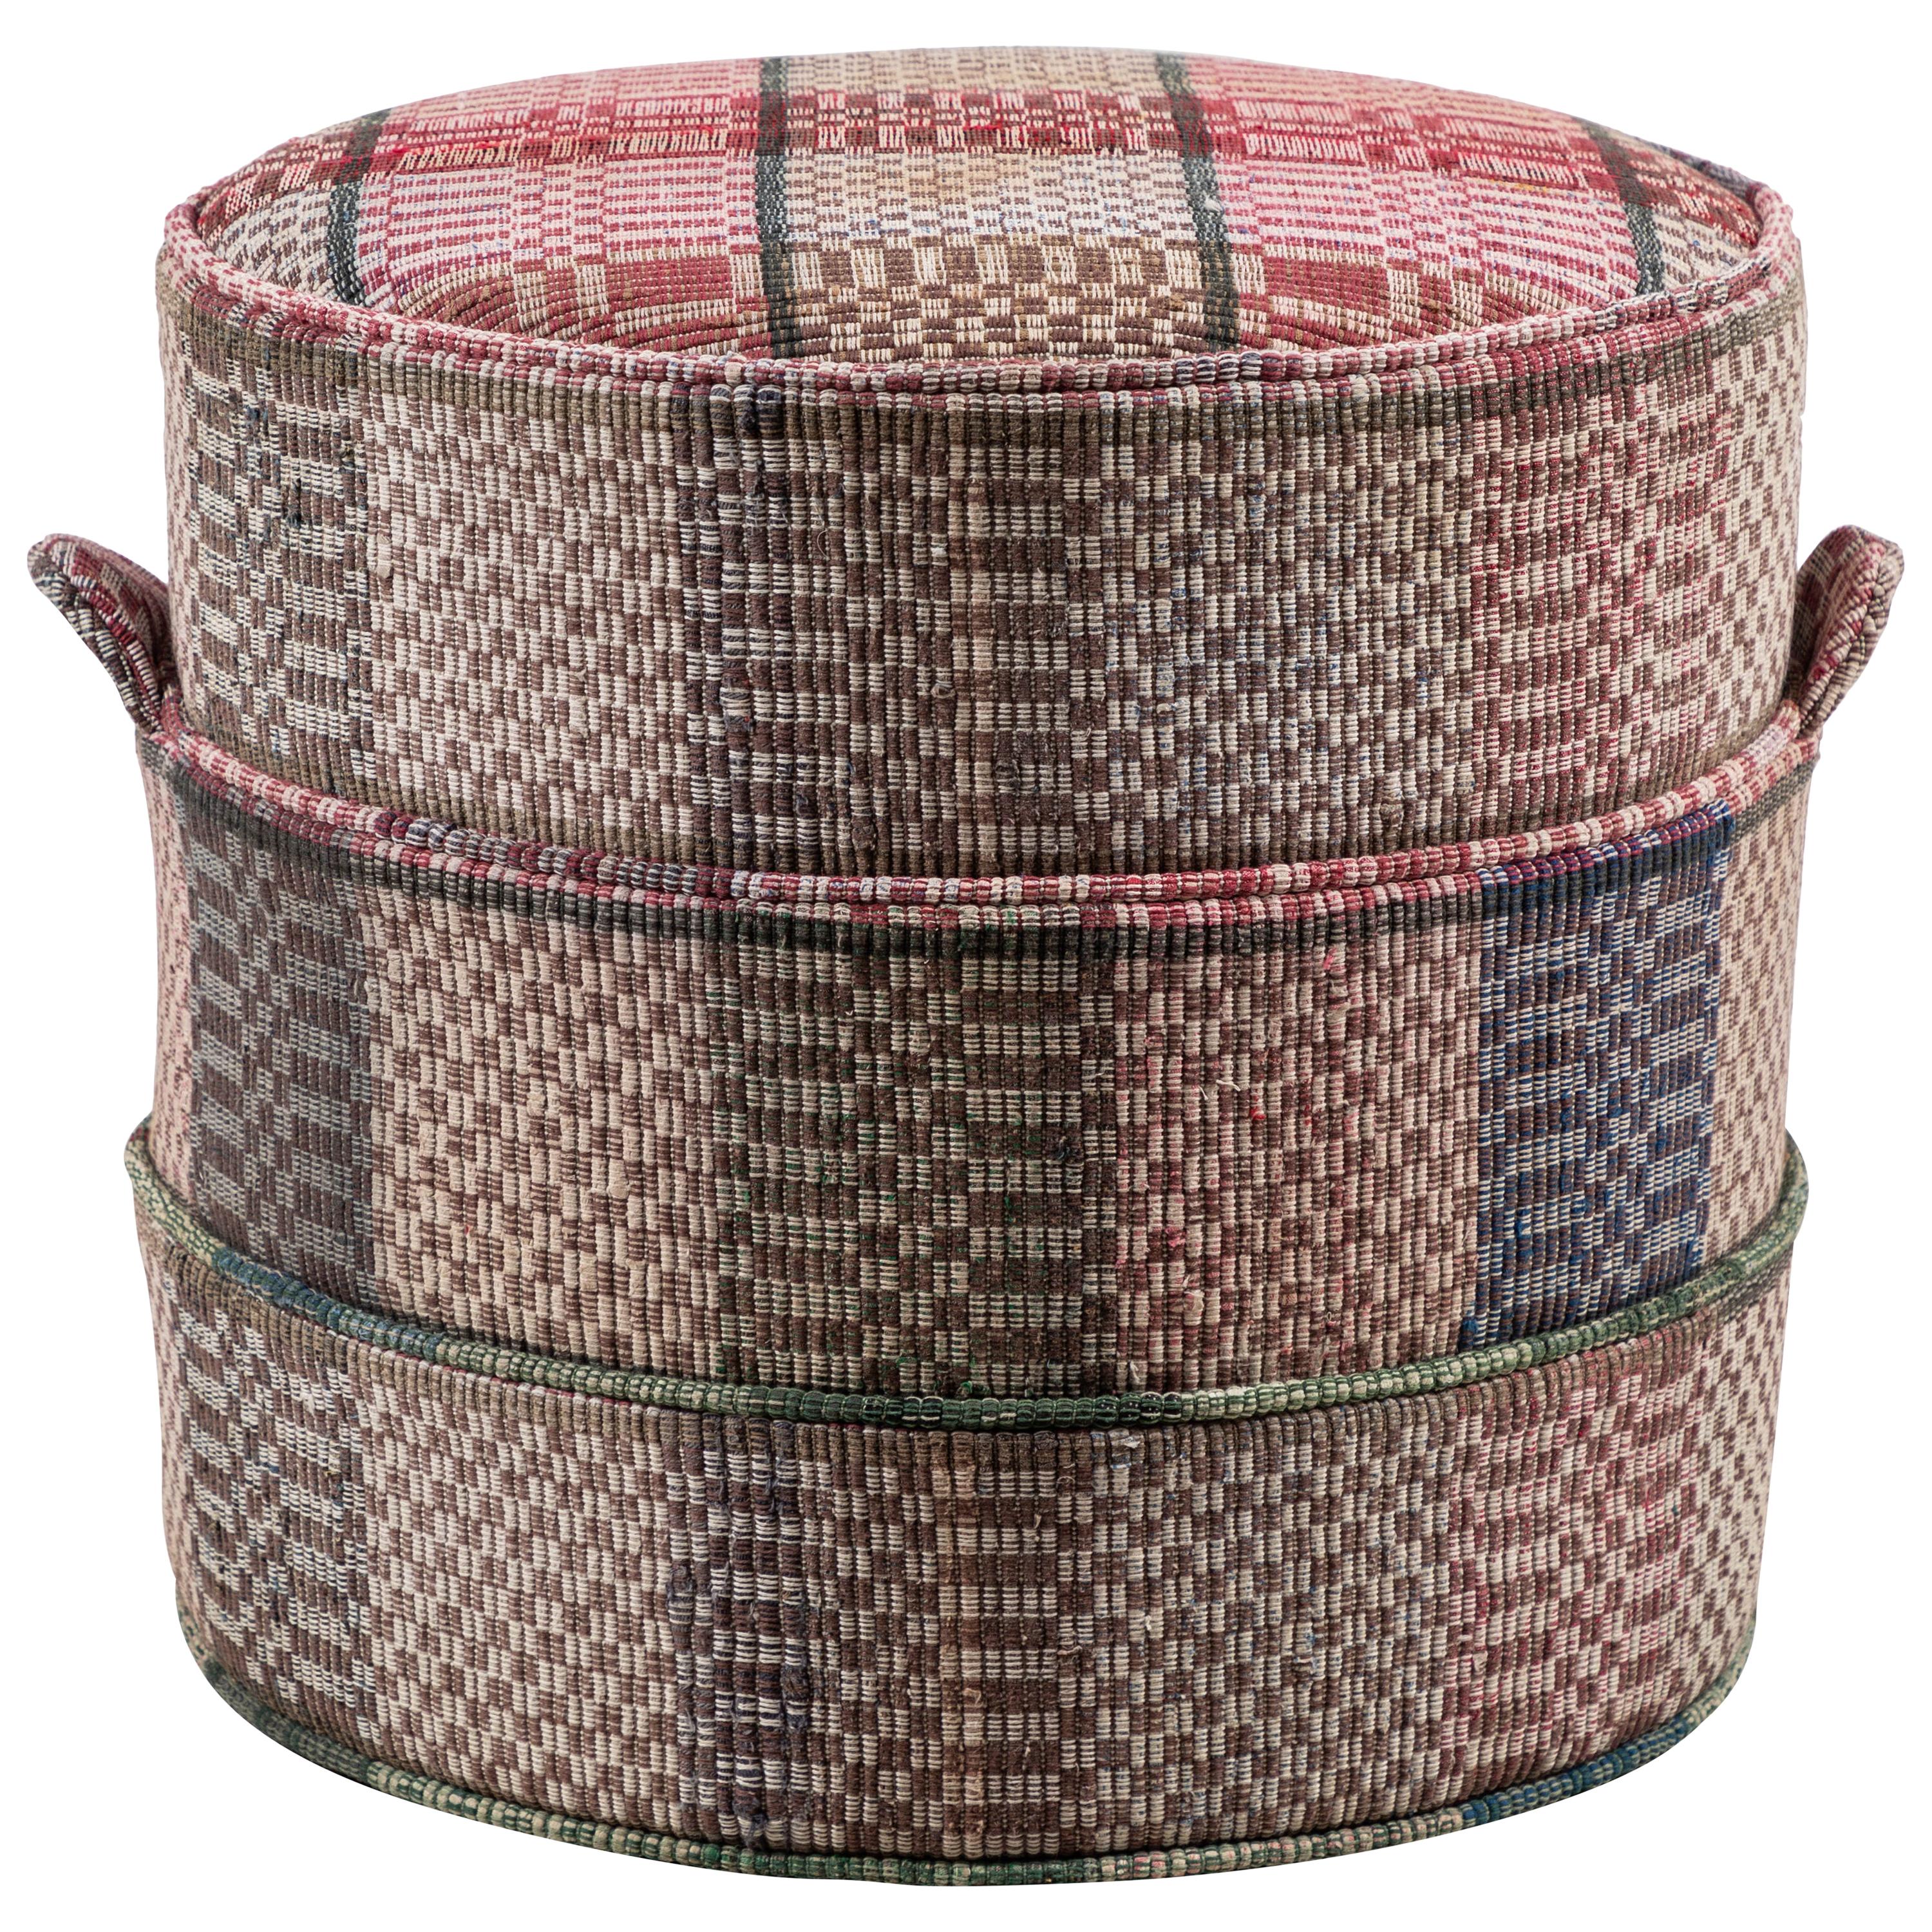 Nickey Kehoe Collection Small Round Hassock Upholstered in Vintage Fabric